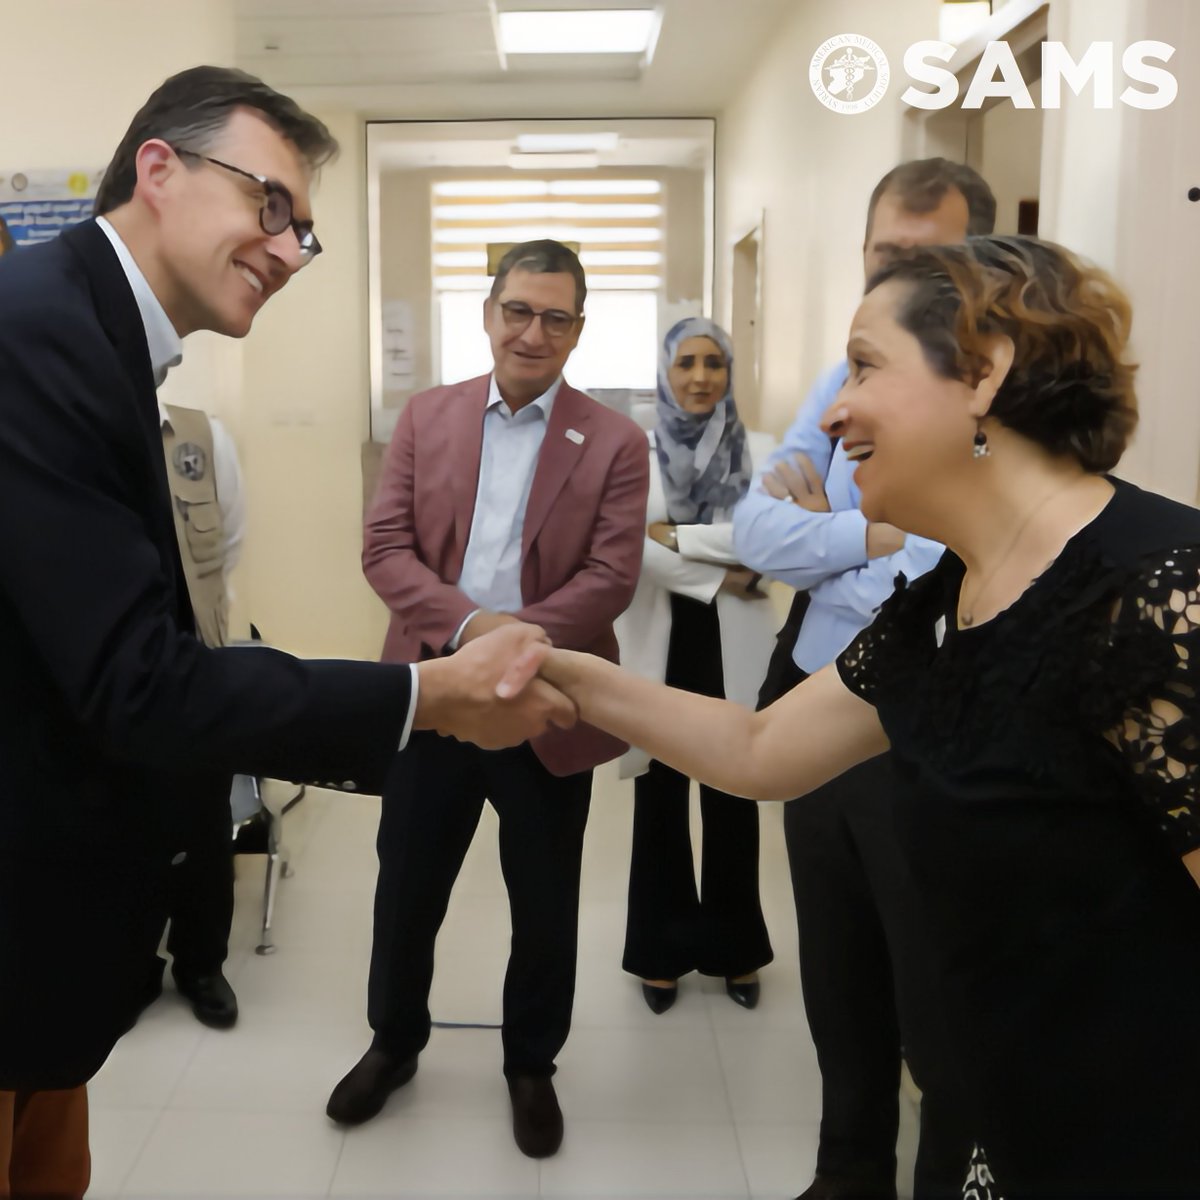 Member Under The Spotlight: Dr. Yassar Kanawati is a psychiatrist with child, adolescent & addiction psychiatry expertise. She's a Fellow @ APA & a CEO @ Peachtree Family Psychiatry Clinic. She's dedicated to advancing #mentalhealth, particularly 4 Syrian refugees. #SAMS #Syria